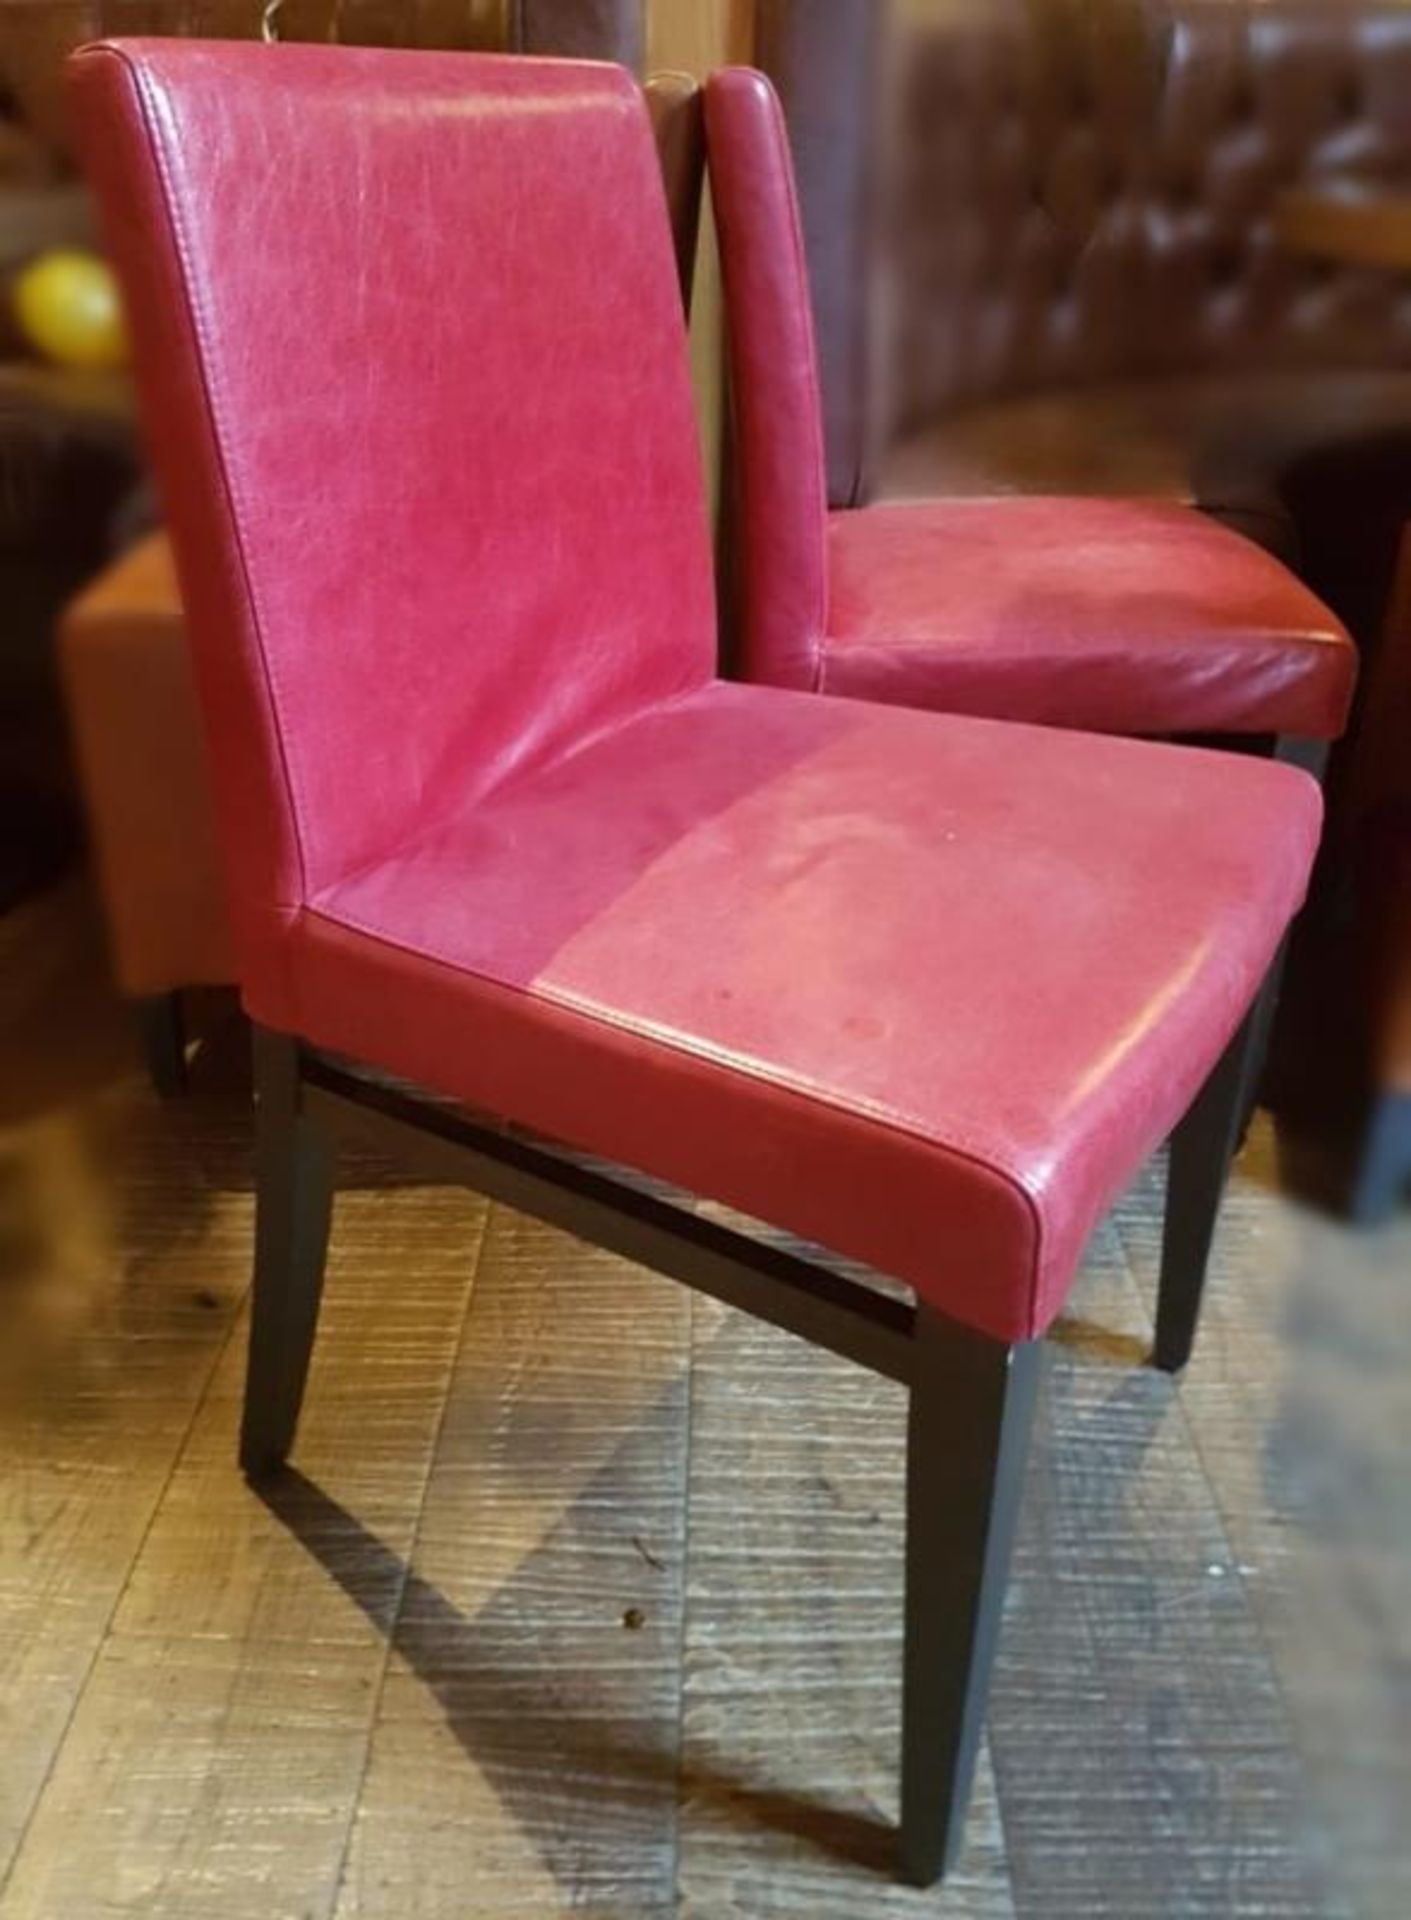 3 x Hard-wearing Red Leather Upholstered Commercial Dining Chairs - Recently Removed From A City Cen - Image 3 of 3